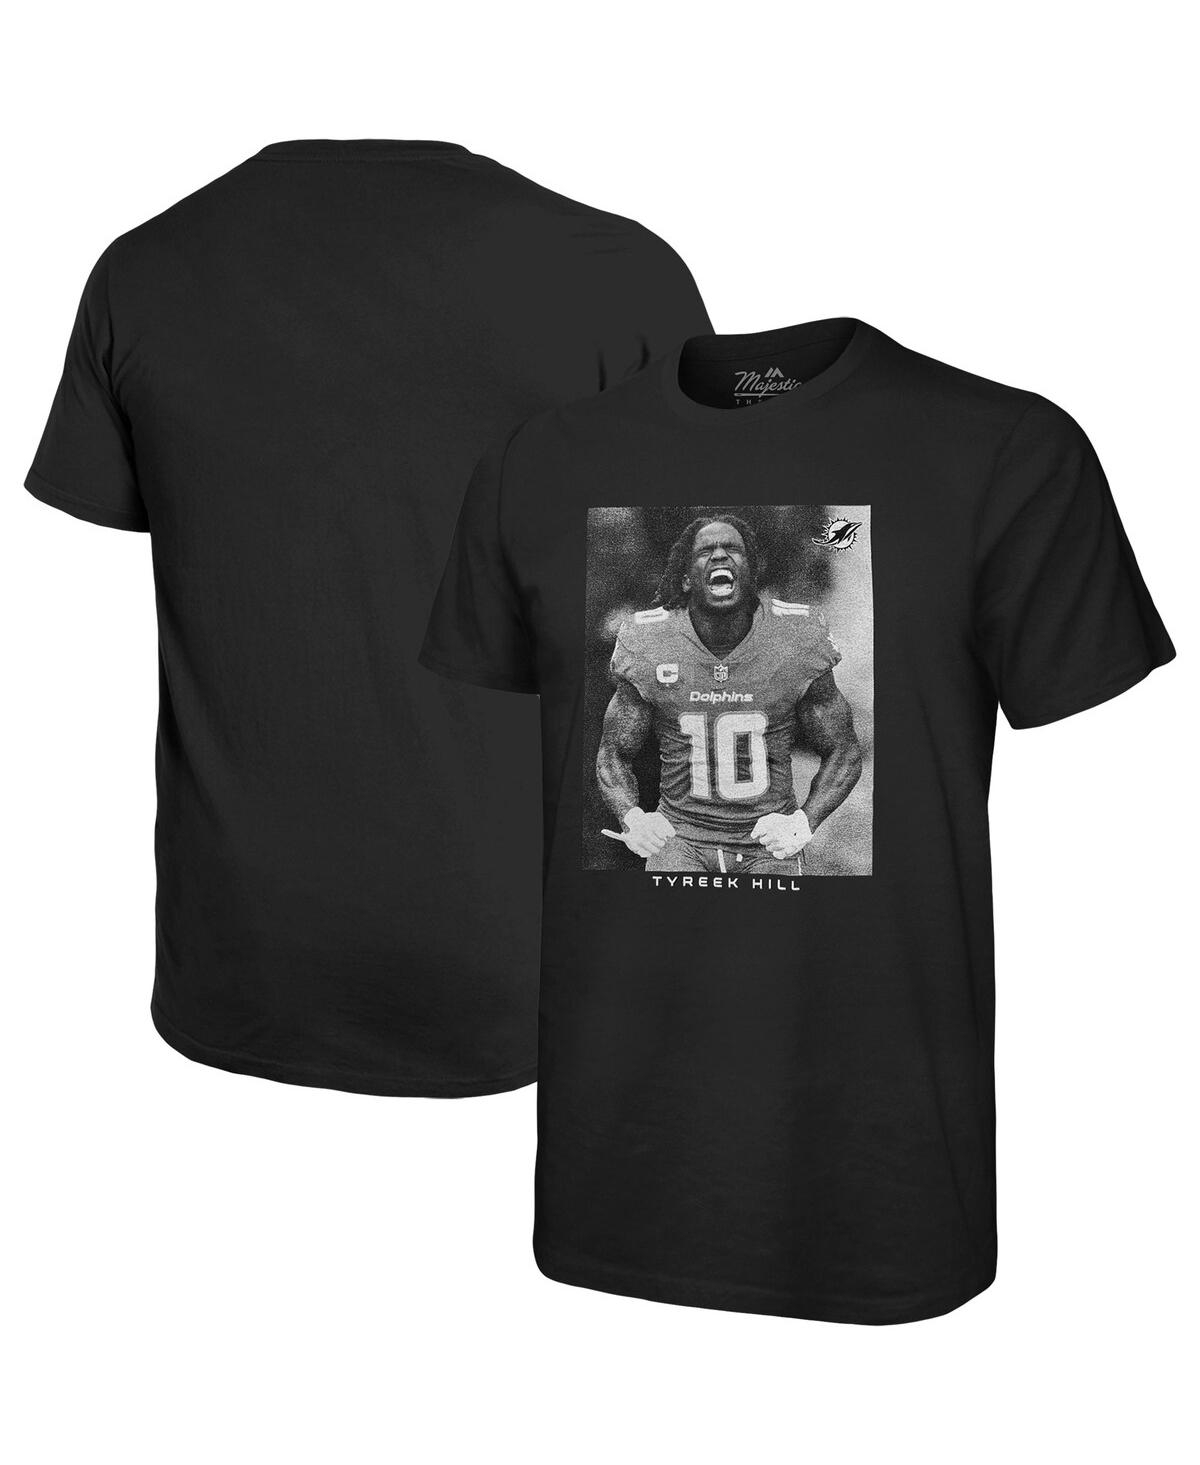 Shop Majestic Men's  Threads Tyreek Hill Black Miami Dolphins Oversized Player Image T-shirt